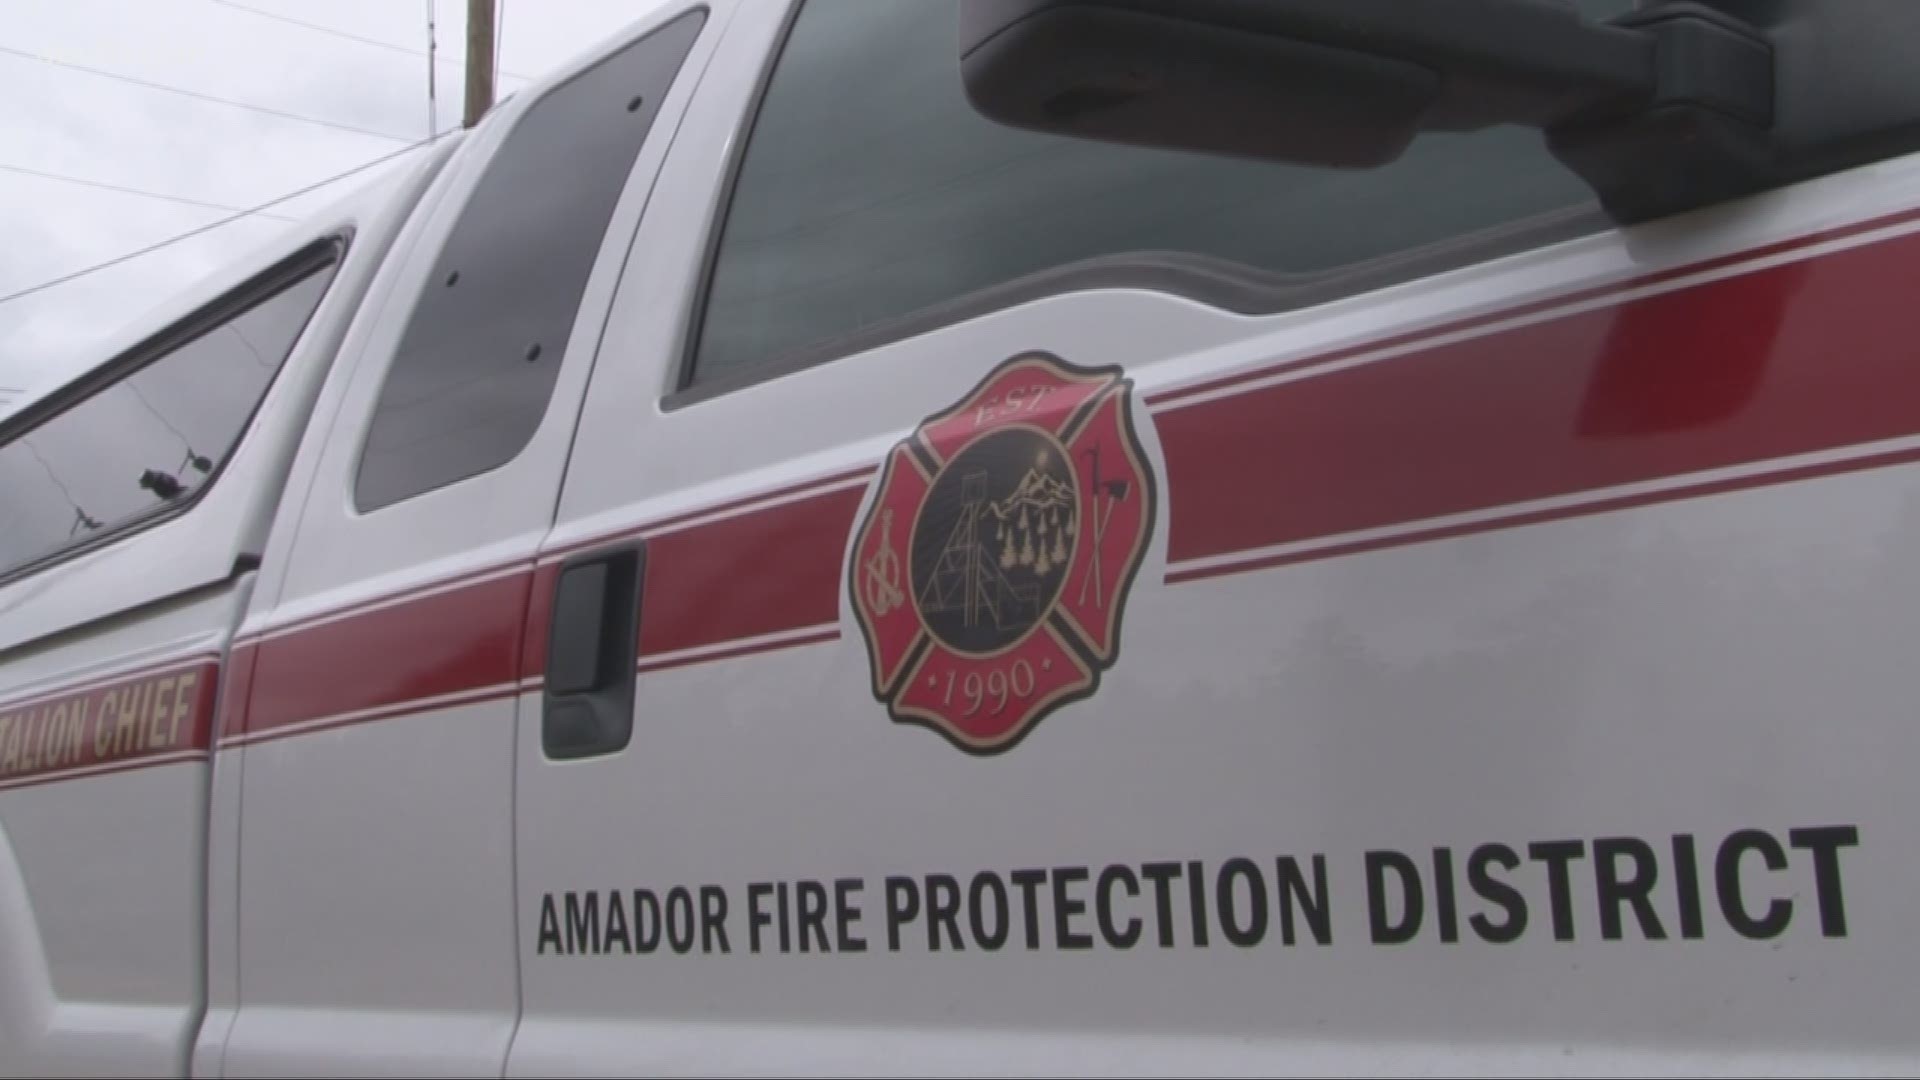 Amador County is looking to improve their EMS system by helping firefighters trained for advanced life support through a "First Responder Fee." While some in the community are supportive, others have voiced their disapproval the fee on social media.